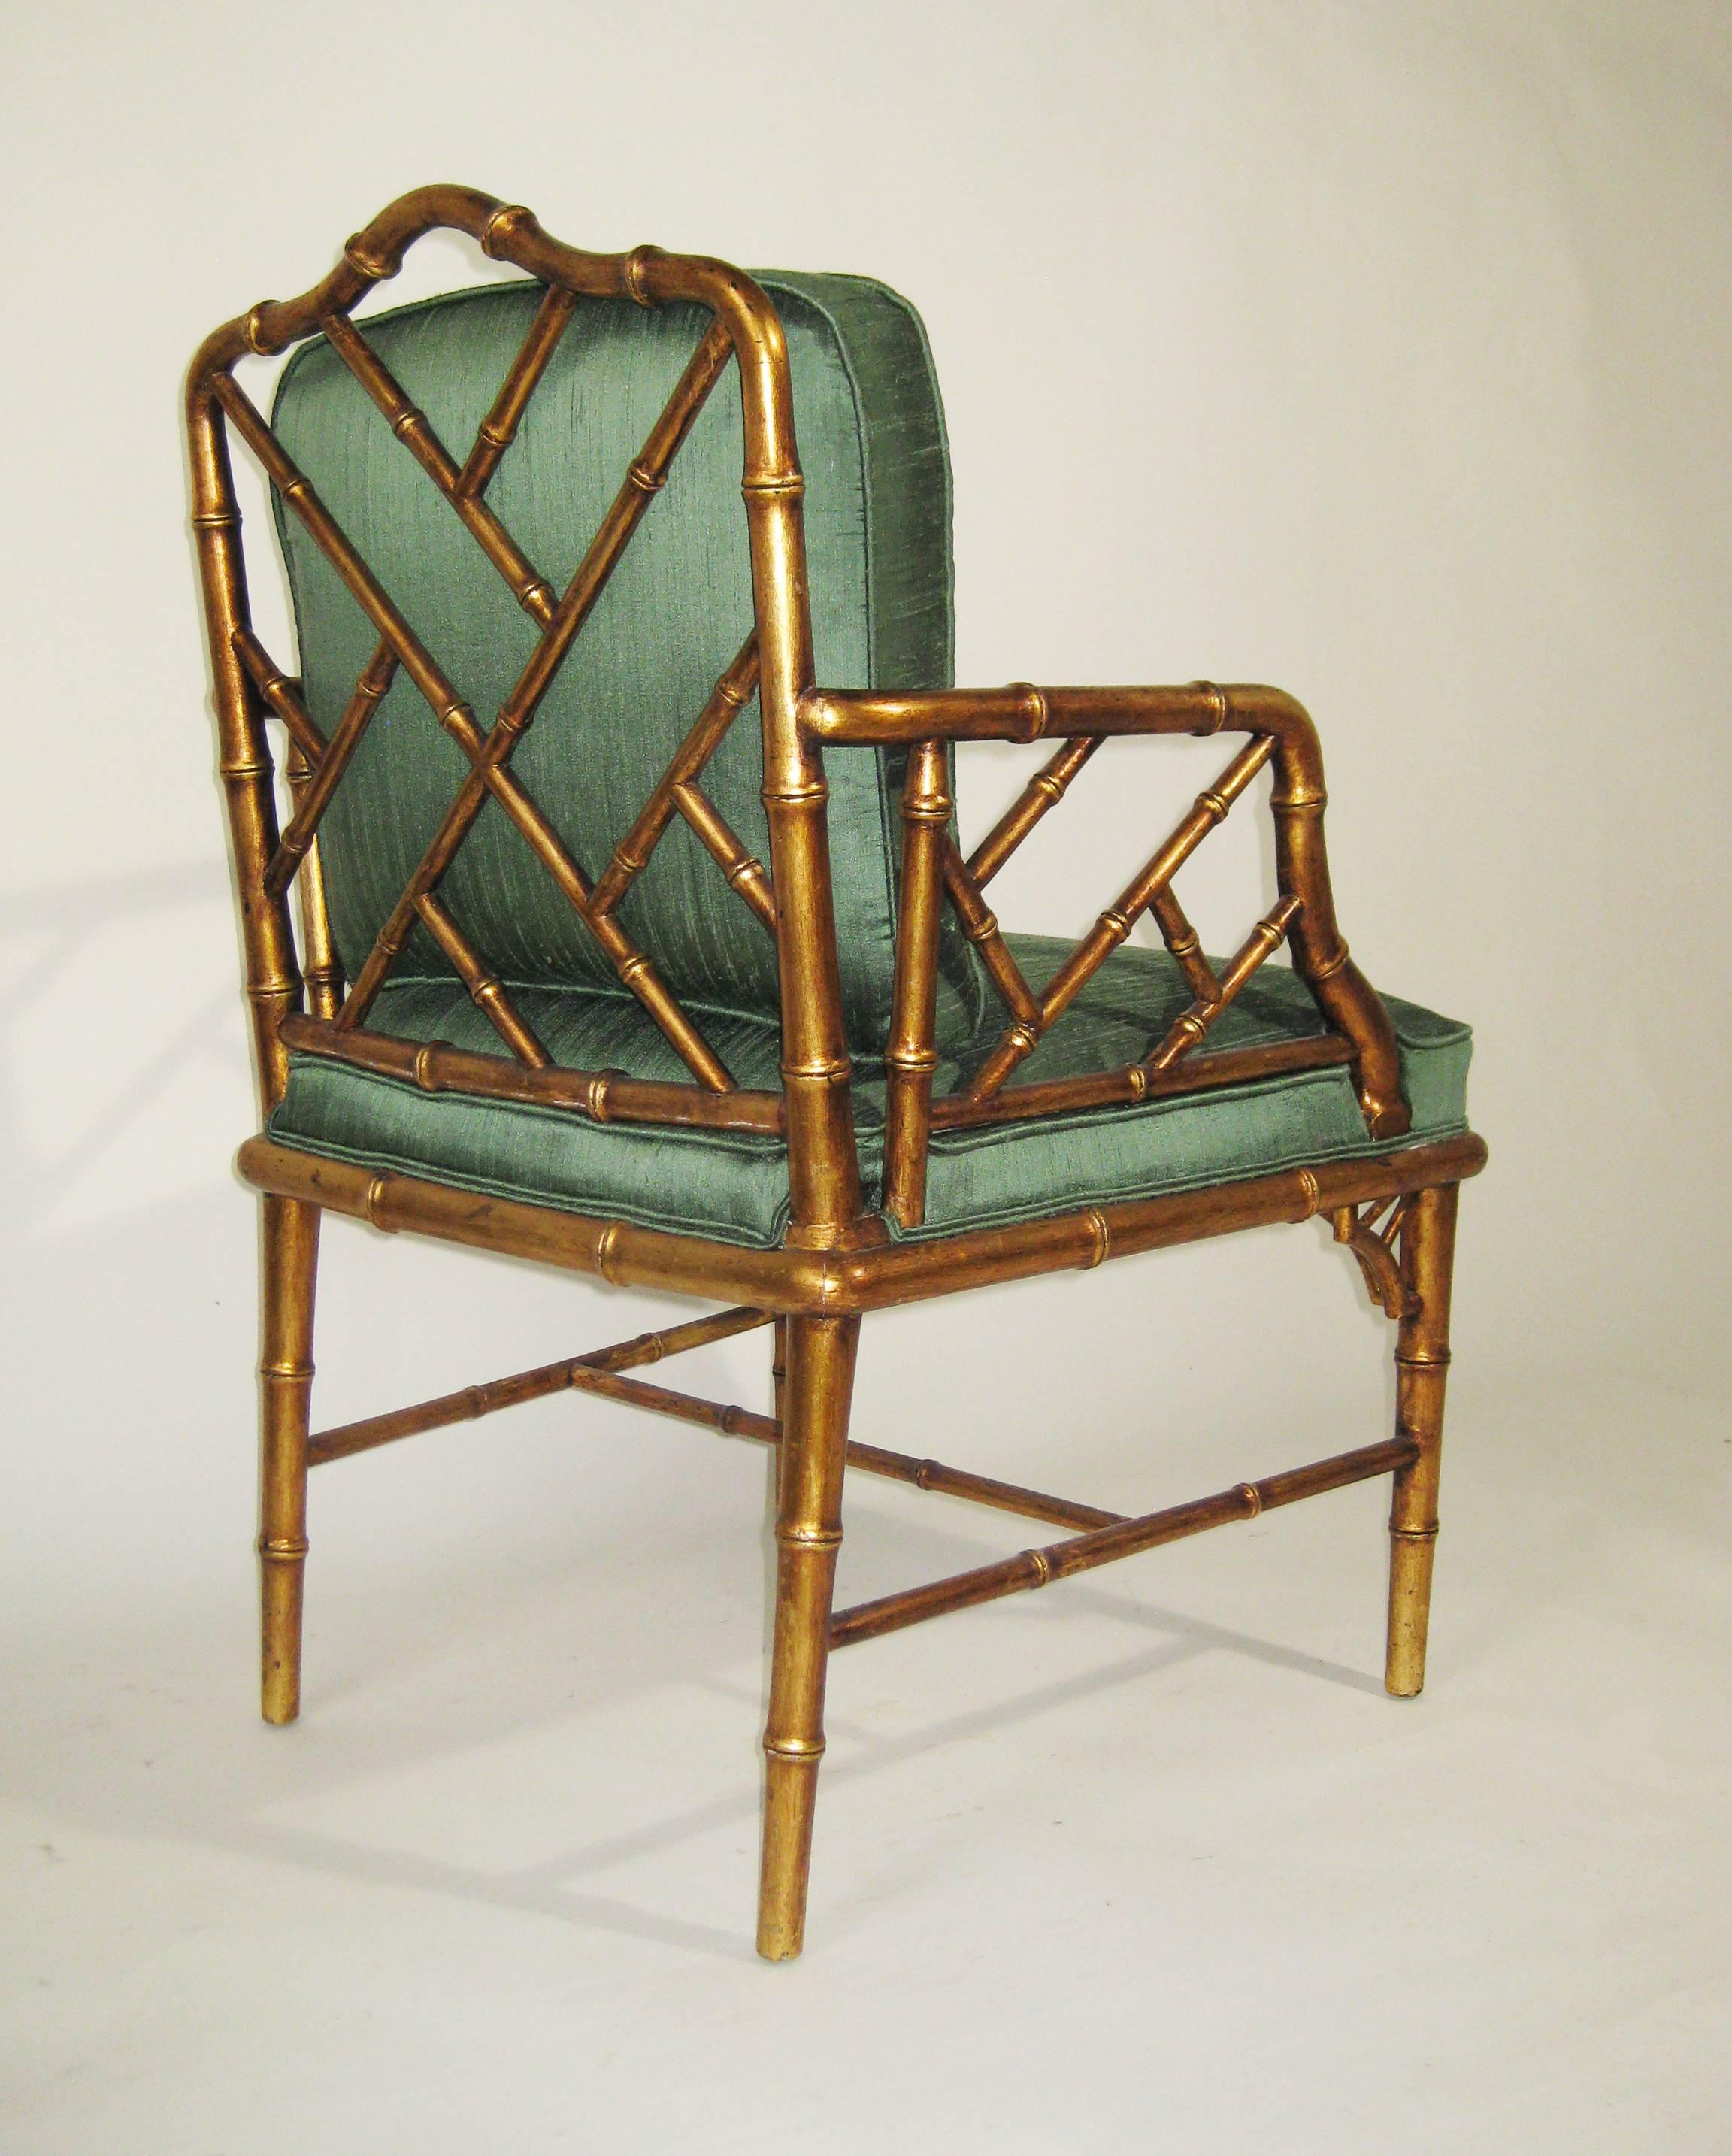 Pair of faux bamboo armchairs enriched in gold leaf and upholstered in "green tea" silk shangtu. From the 1960s and the fashion of that period for exotic, far-eastern influences. Obtained from an estate populated with pieces by Arturo